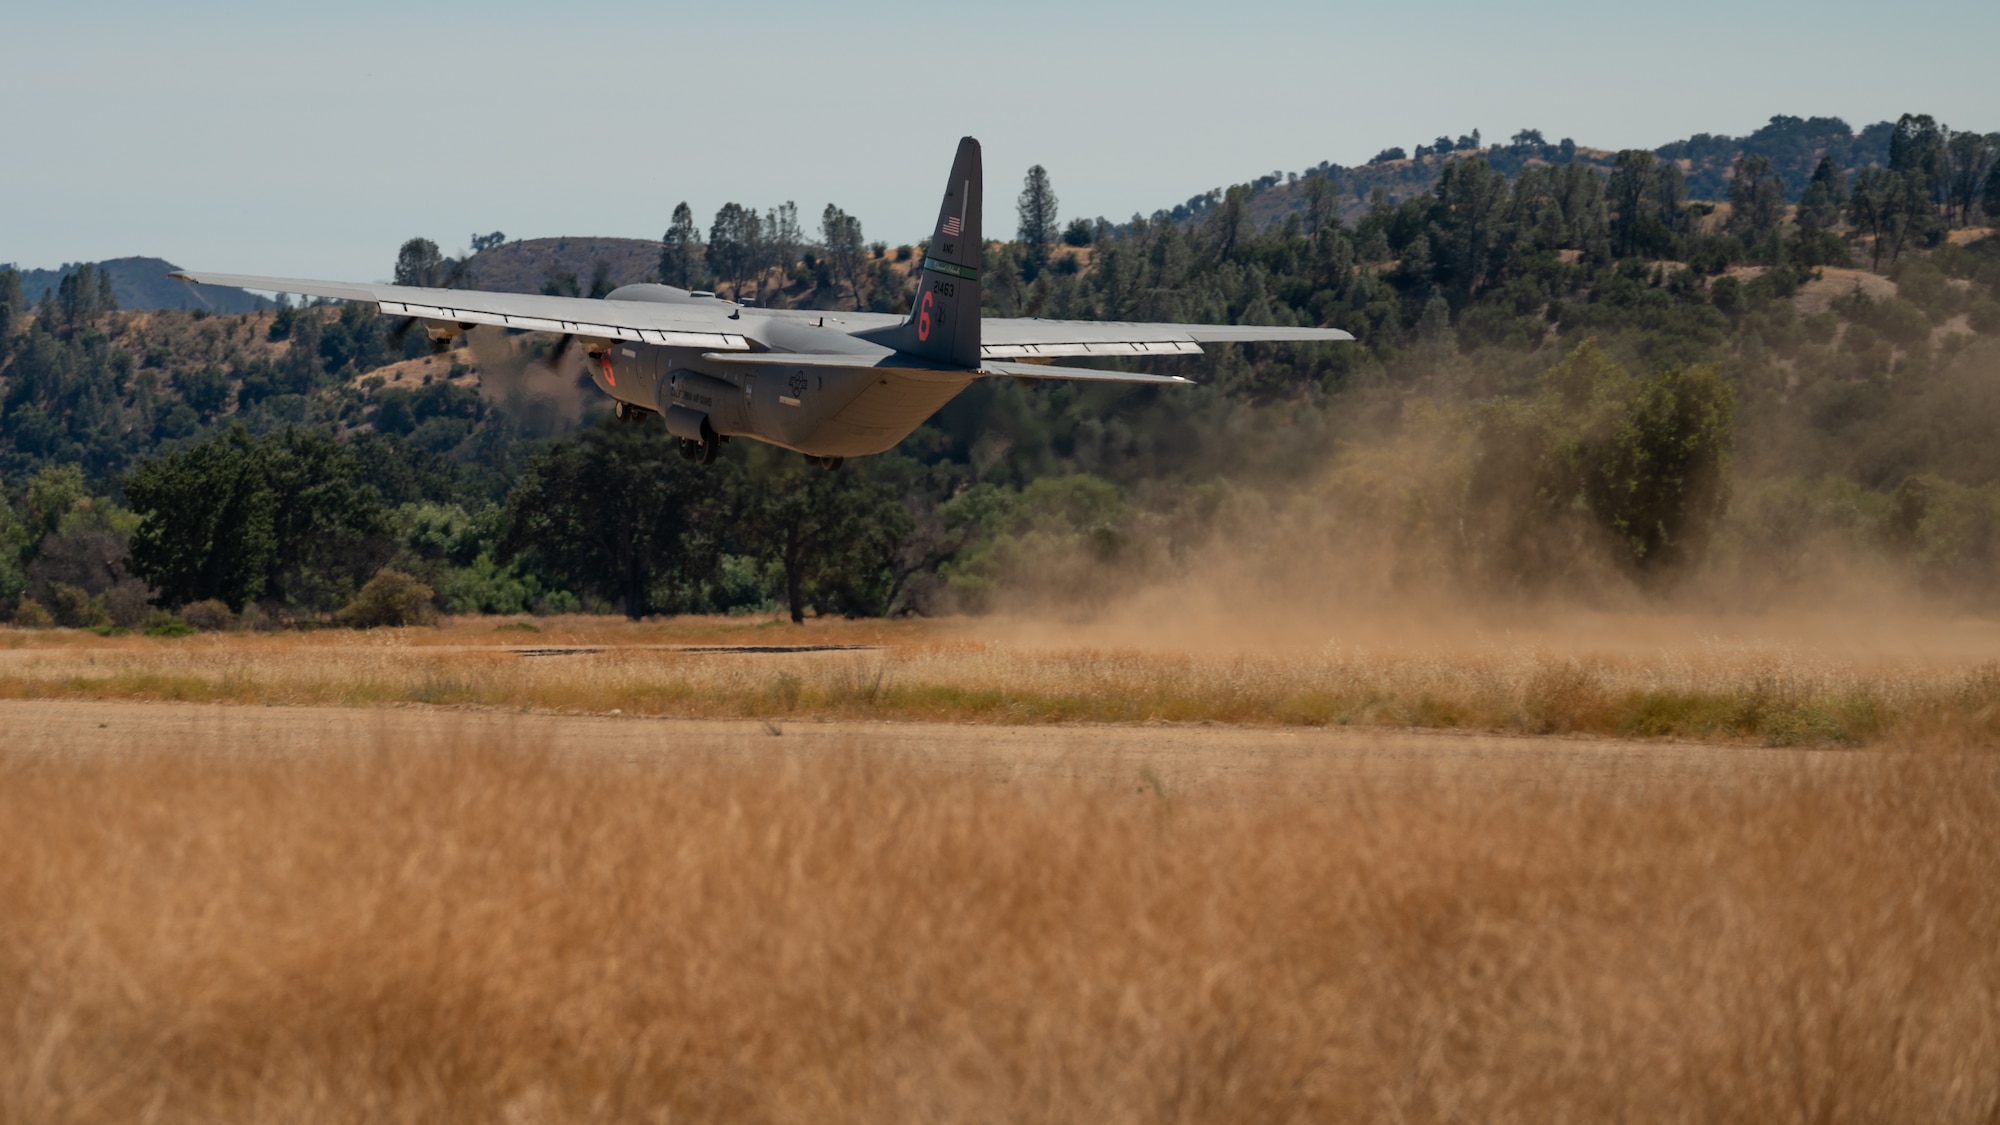 A California Air National Guard C-130J Super Hercules aircraft assigned to the 115th Airlift Squadron departs a tactical runway during an exercise at Schoonover Airfield, Fort Hunter Liggett, California, Sept. 9, 2023. The exercise, also known as Crisis Beach II, was a multi-day exercise to evaluate the 146th Airlift Wing's ability to deploy, adapt, and survive in a contested environment. Airmen participating implemented many skill sets shared from other career fields to demonstrate their ability to execute the Agile Combat Employment (ACE) model, highlighting their proactive and reactive operational strategies under simulated threat timelines in order to increase survivability while generating combat power. (U.S. Air National Guard photo by Maj. Andrei Mostovoj)